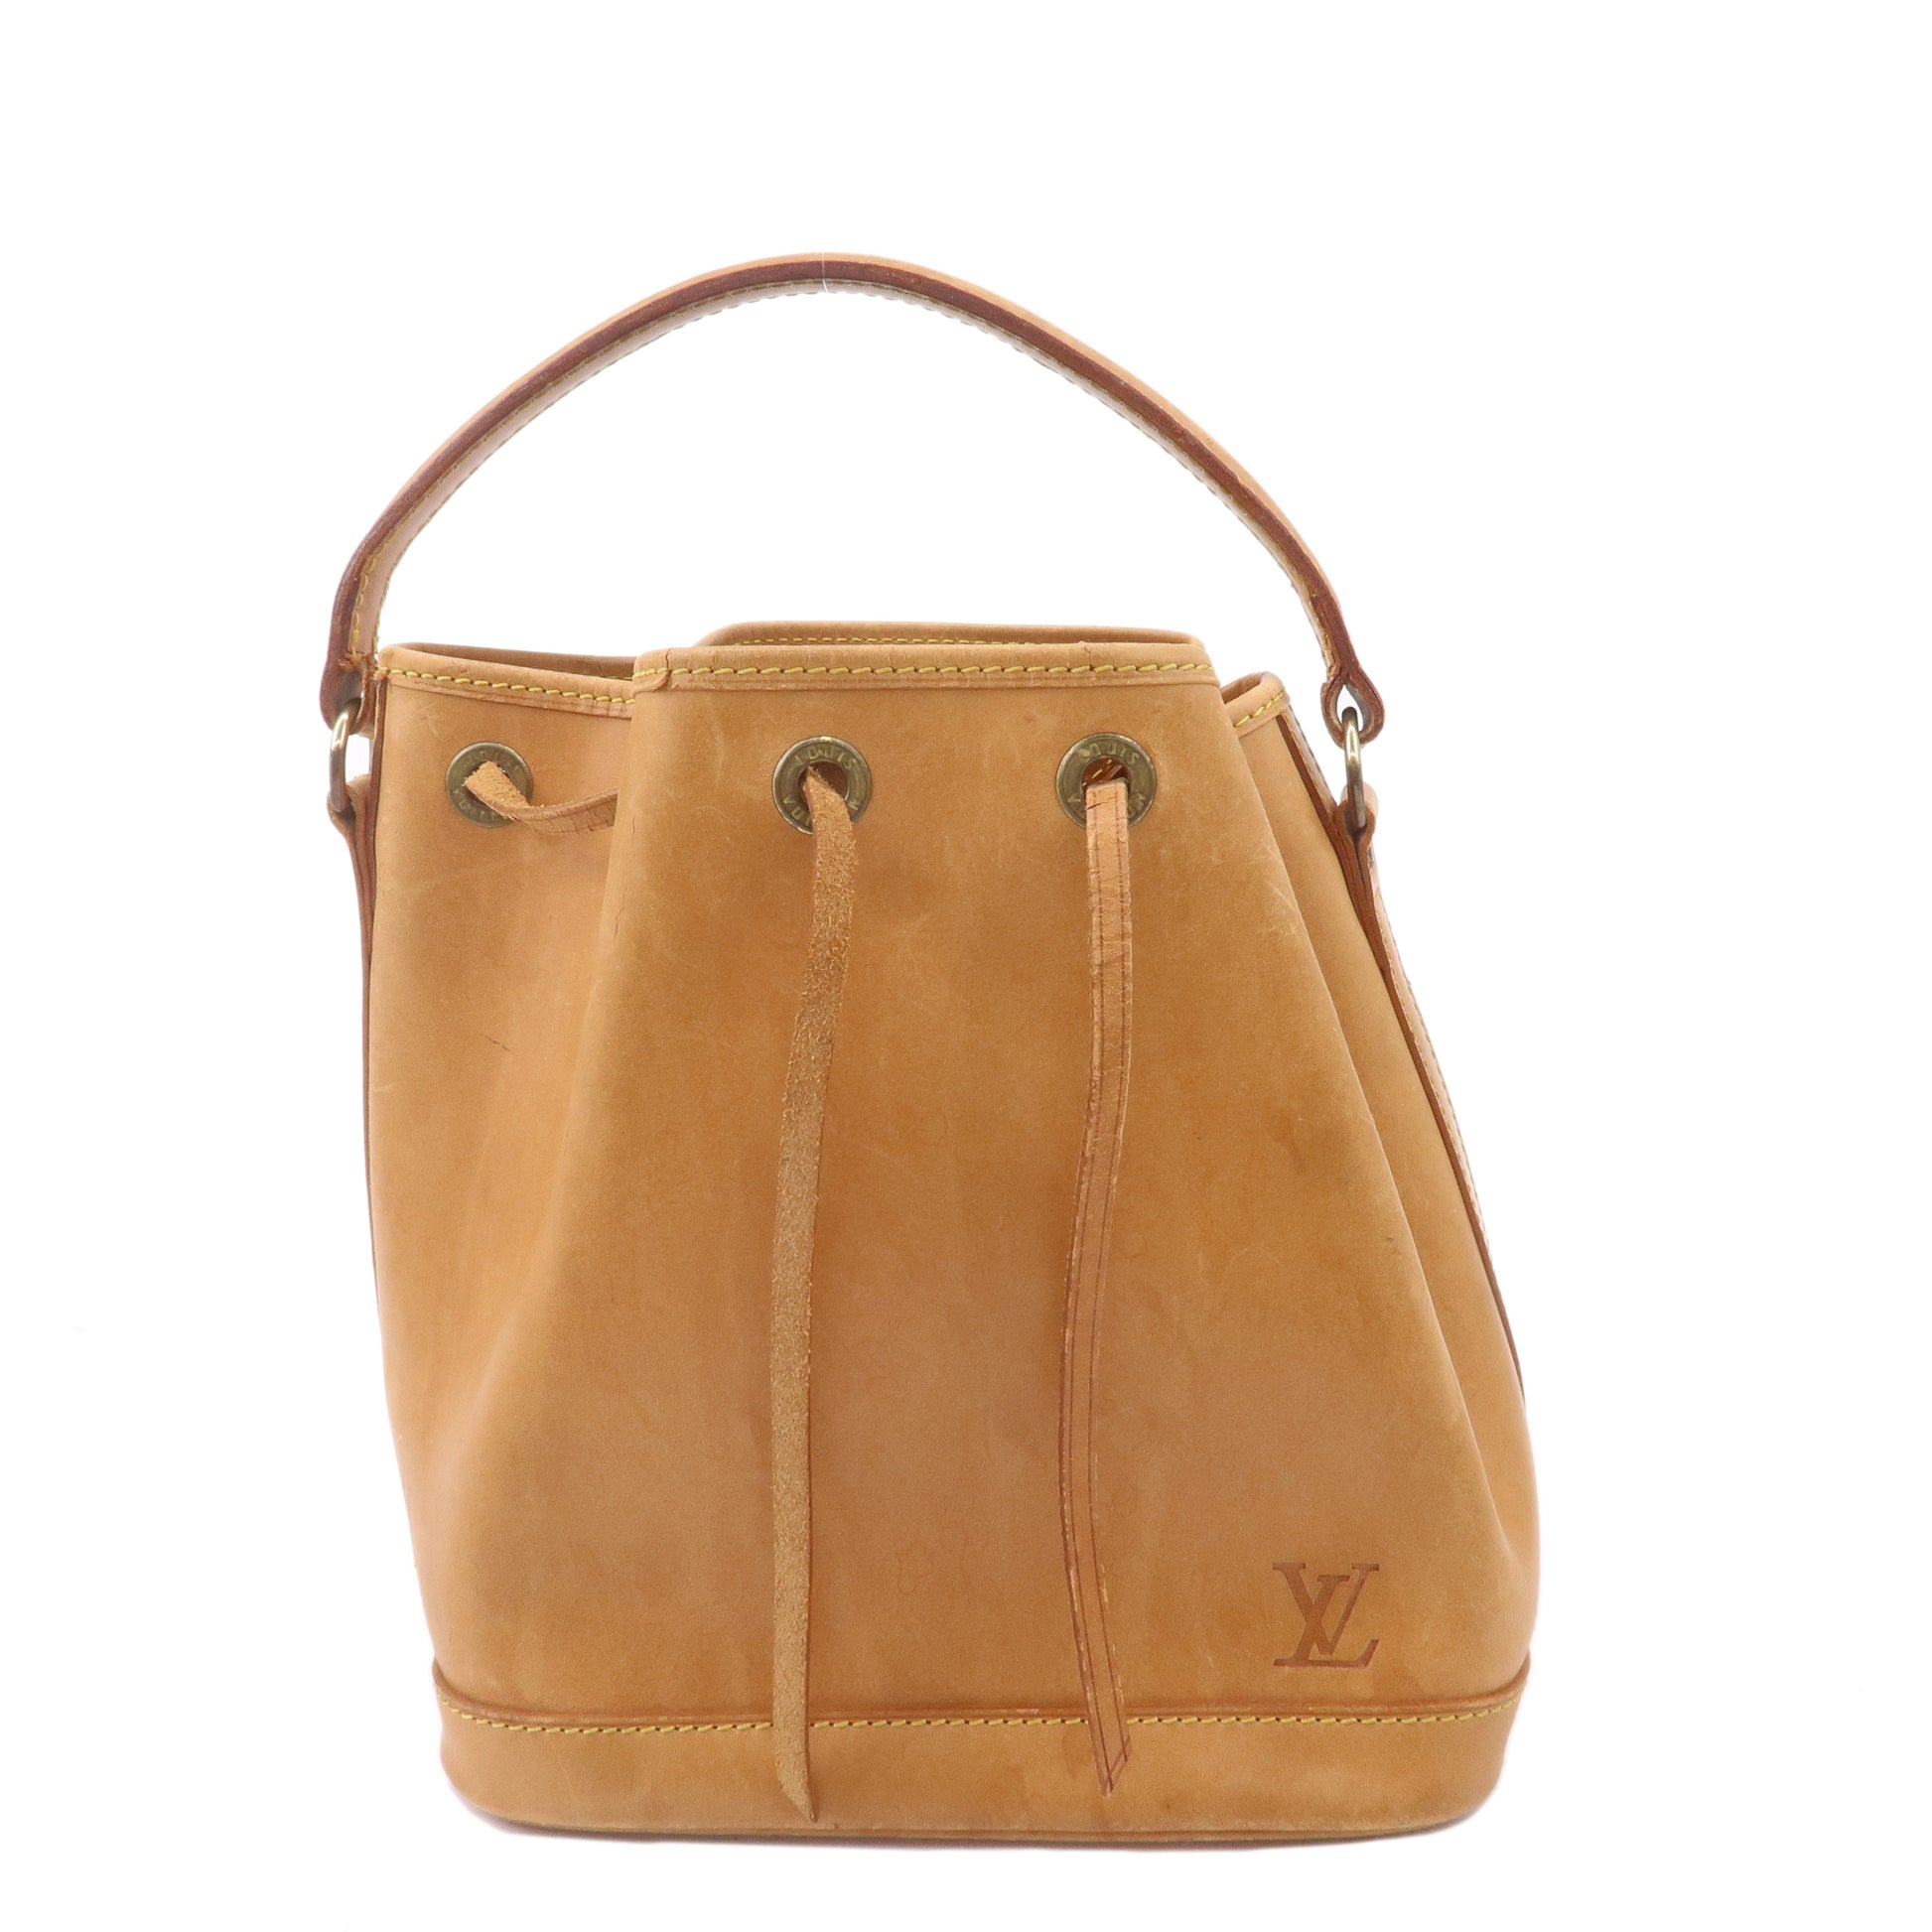 Louis Vuitton Natural Nomade Leather Speedy Bag. Excellent